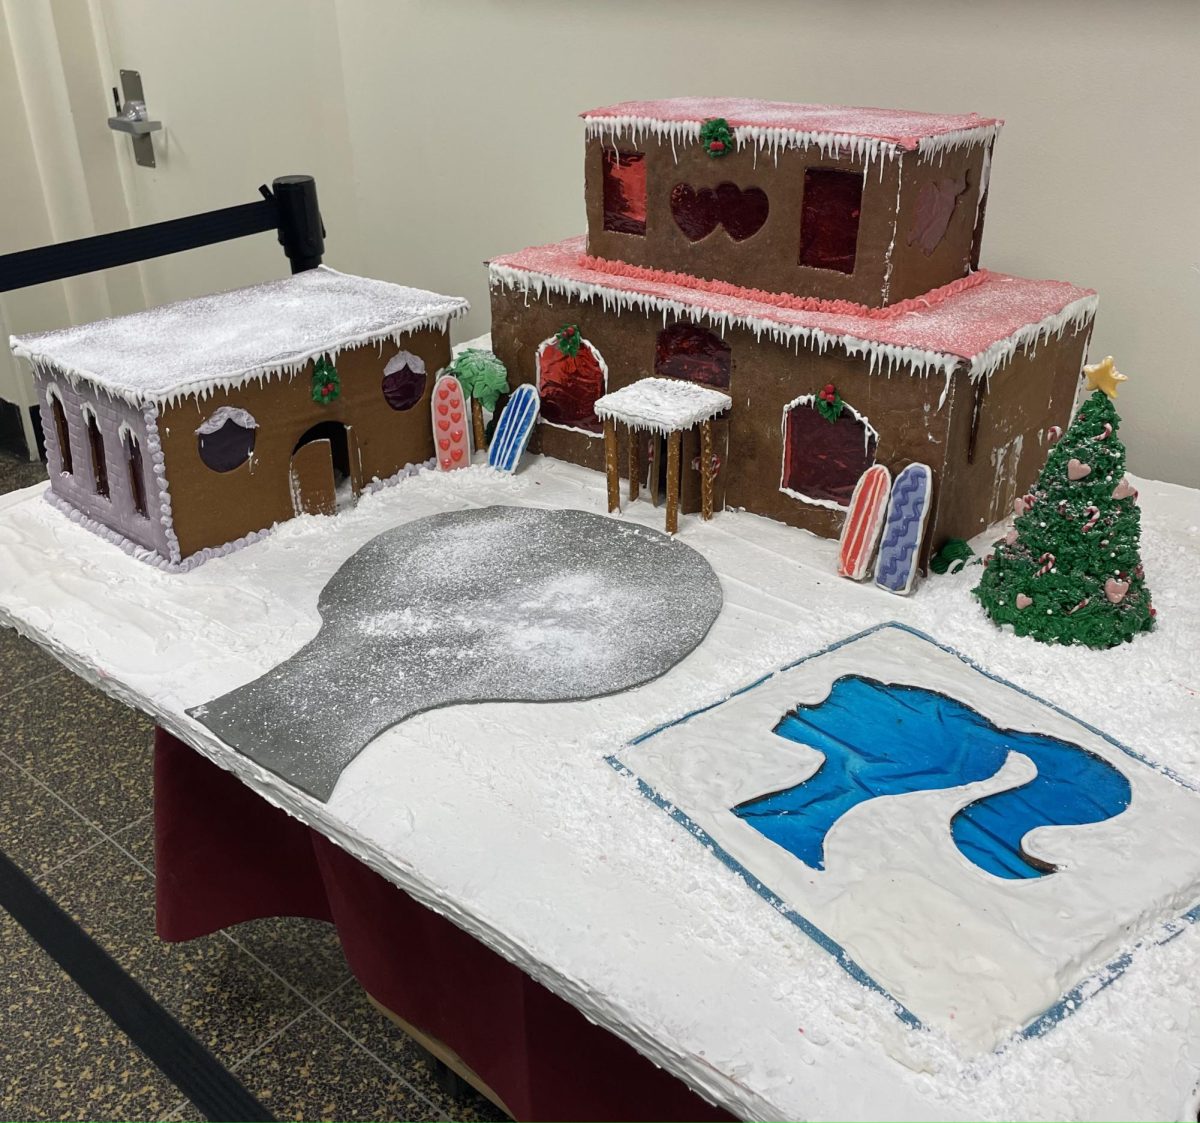 The final gingerbread house display outside of room 226.